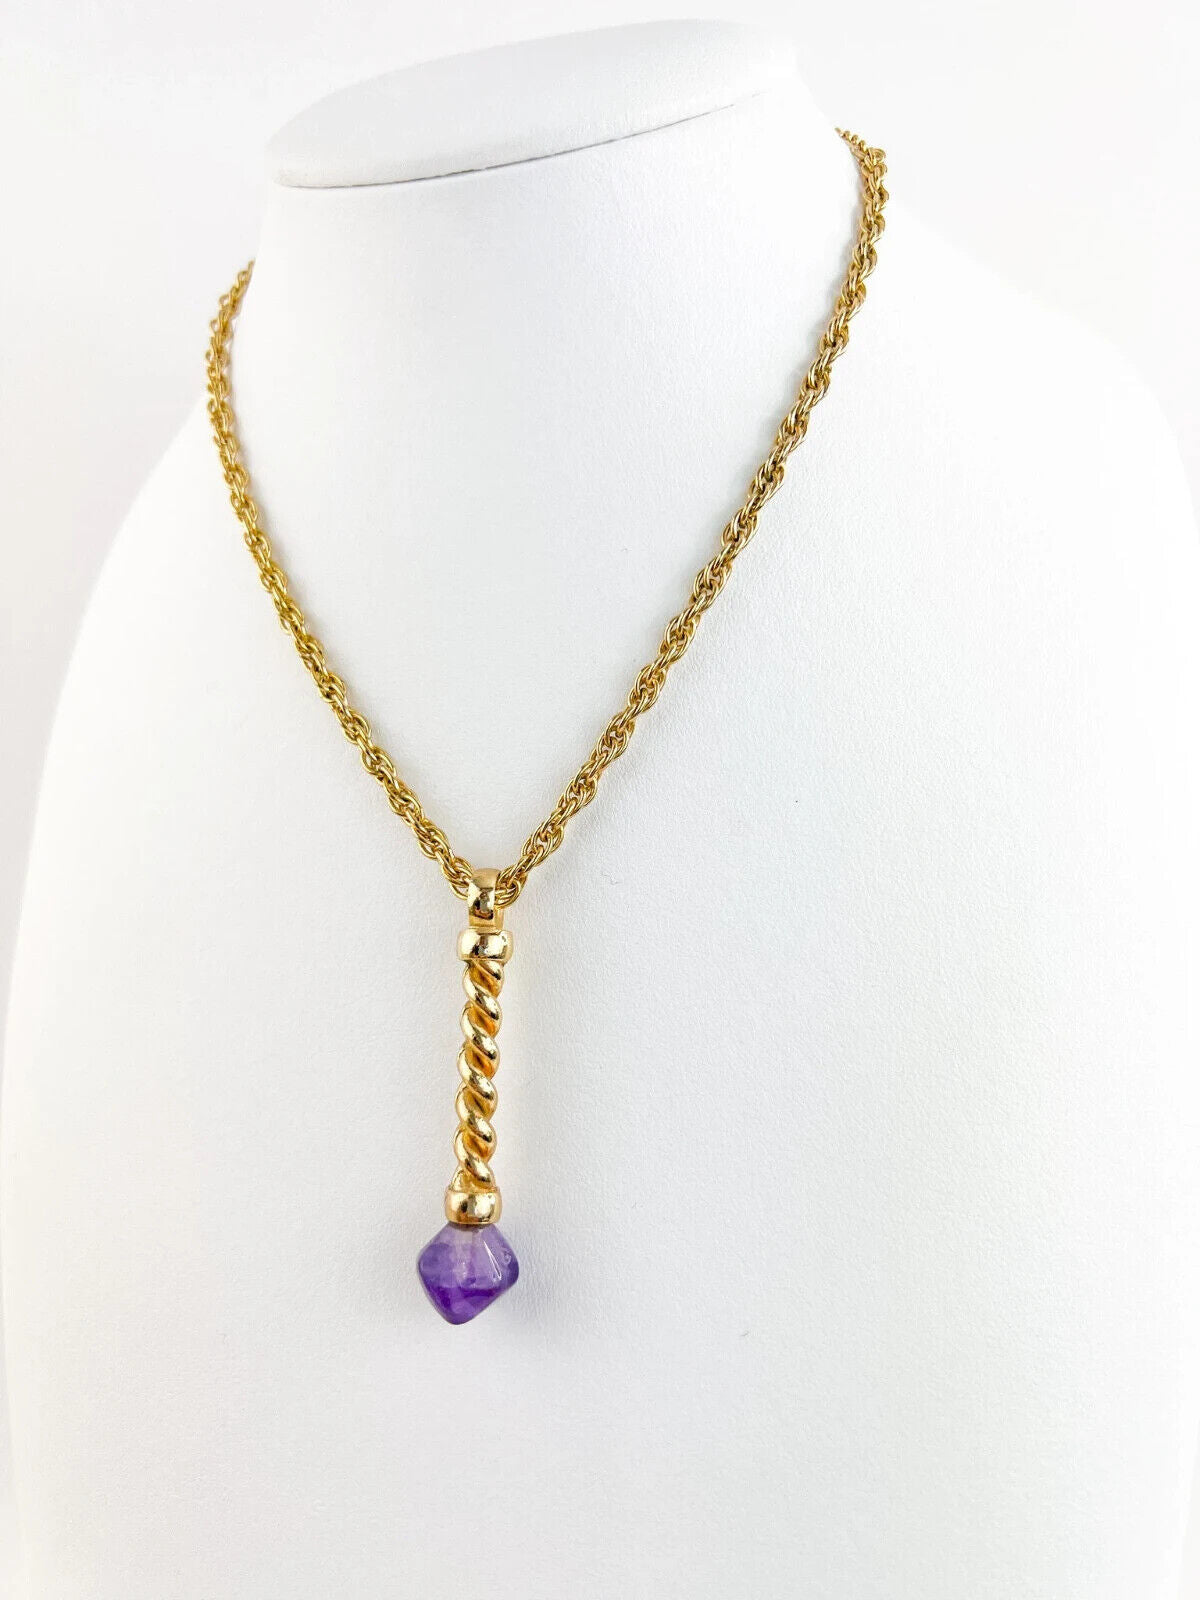 Grosse Necklace, Vintage Necklace Gold Tone Pendant Necklace, Marble Tone Purple Pendant, birthday gift, Gift for women, Jewelry for Women